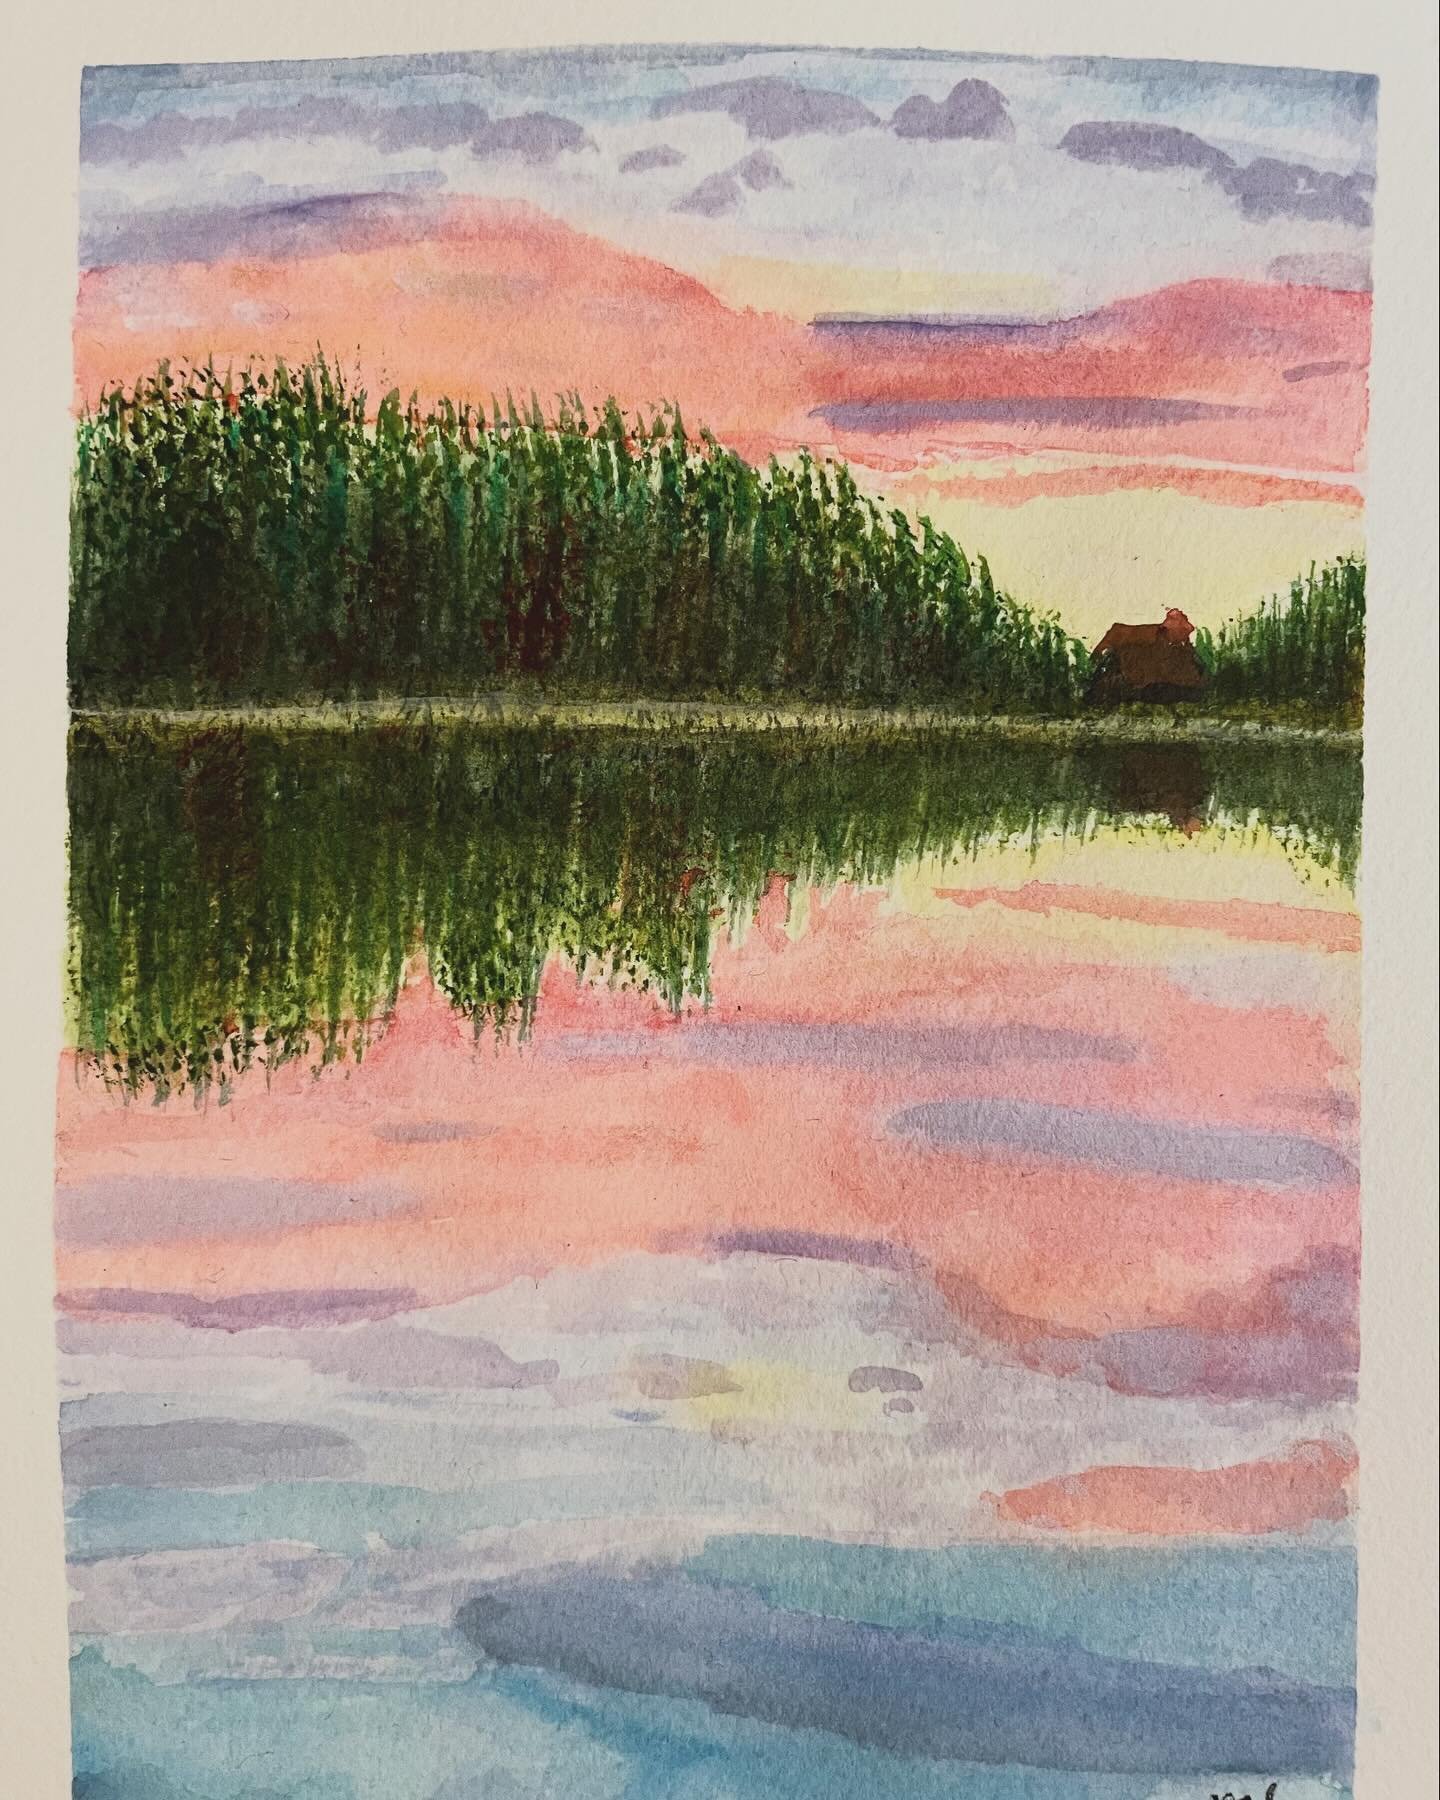 A cabin&rsquo;s reflection based off a still from a video  of an area in Lubec, Maine by photographer Brenda Taxiachris! #watercolor #watercolorreflections #watercolorlandscape #watercolorseascape #maineart #mainelandscape #watercolormaine